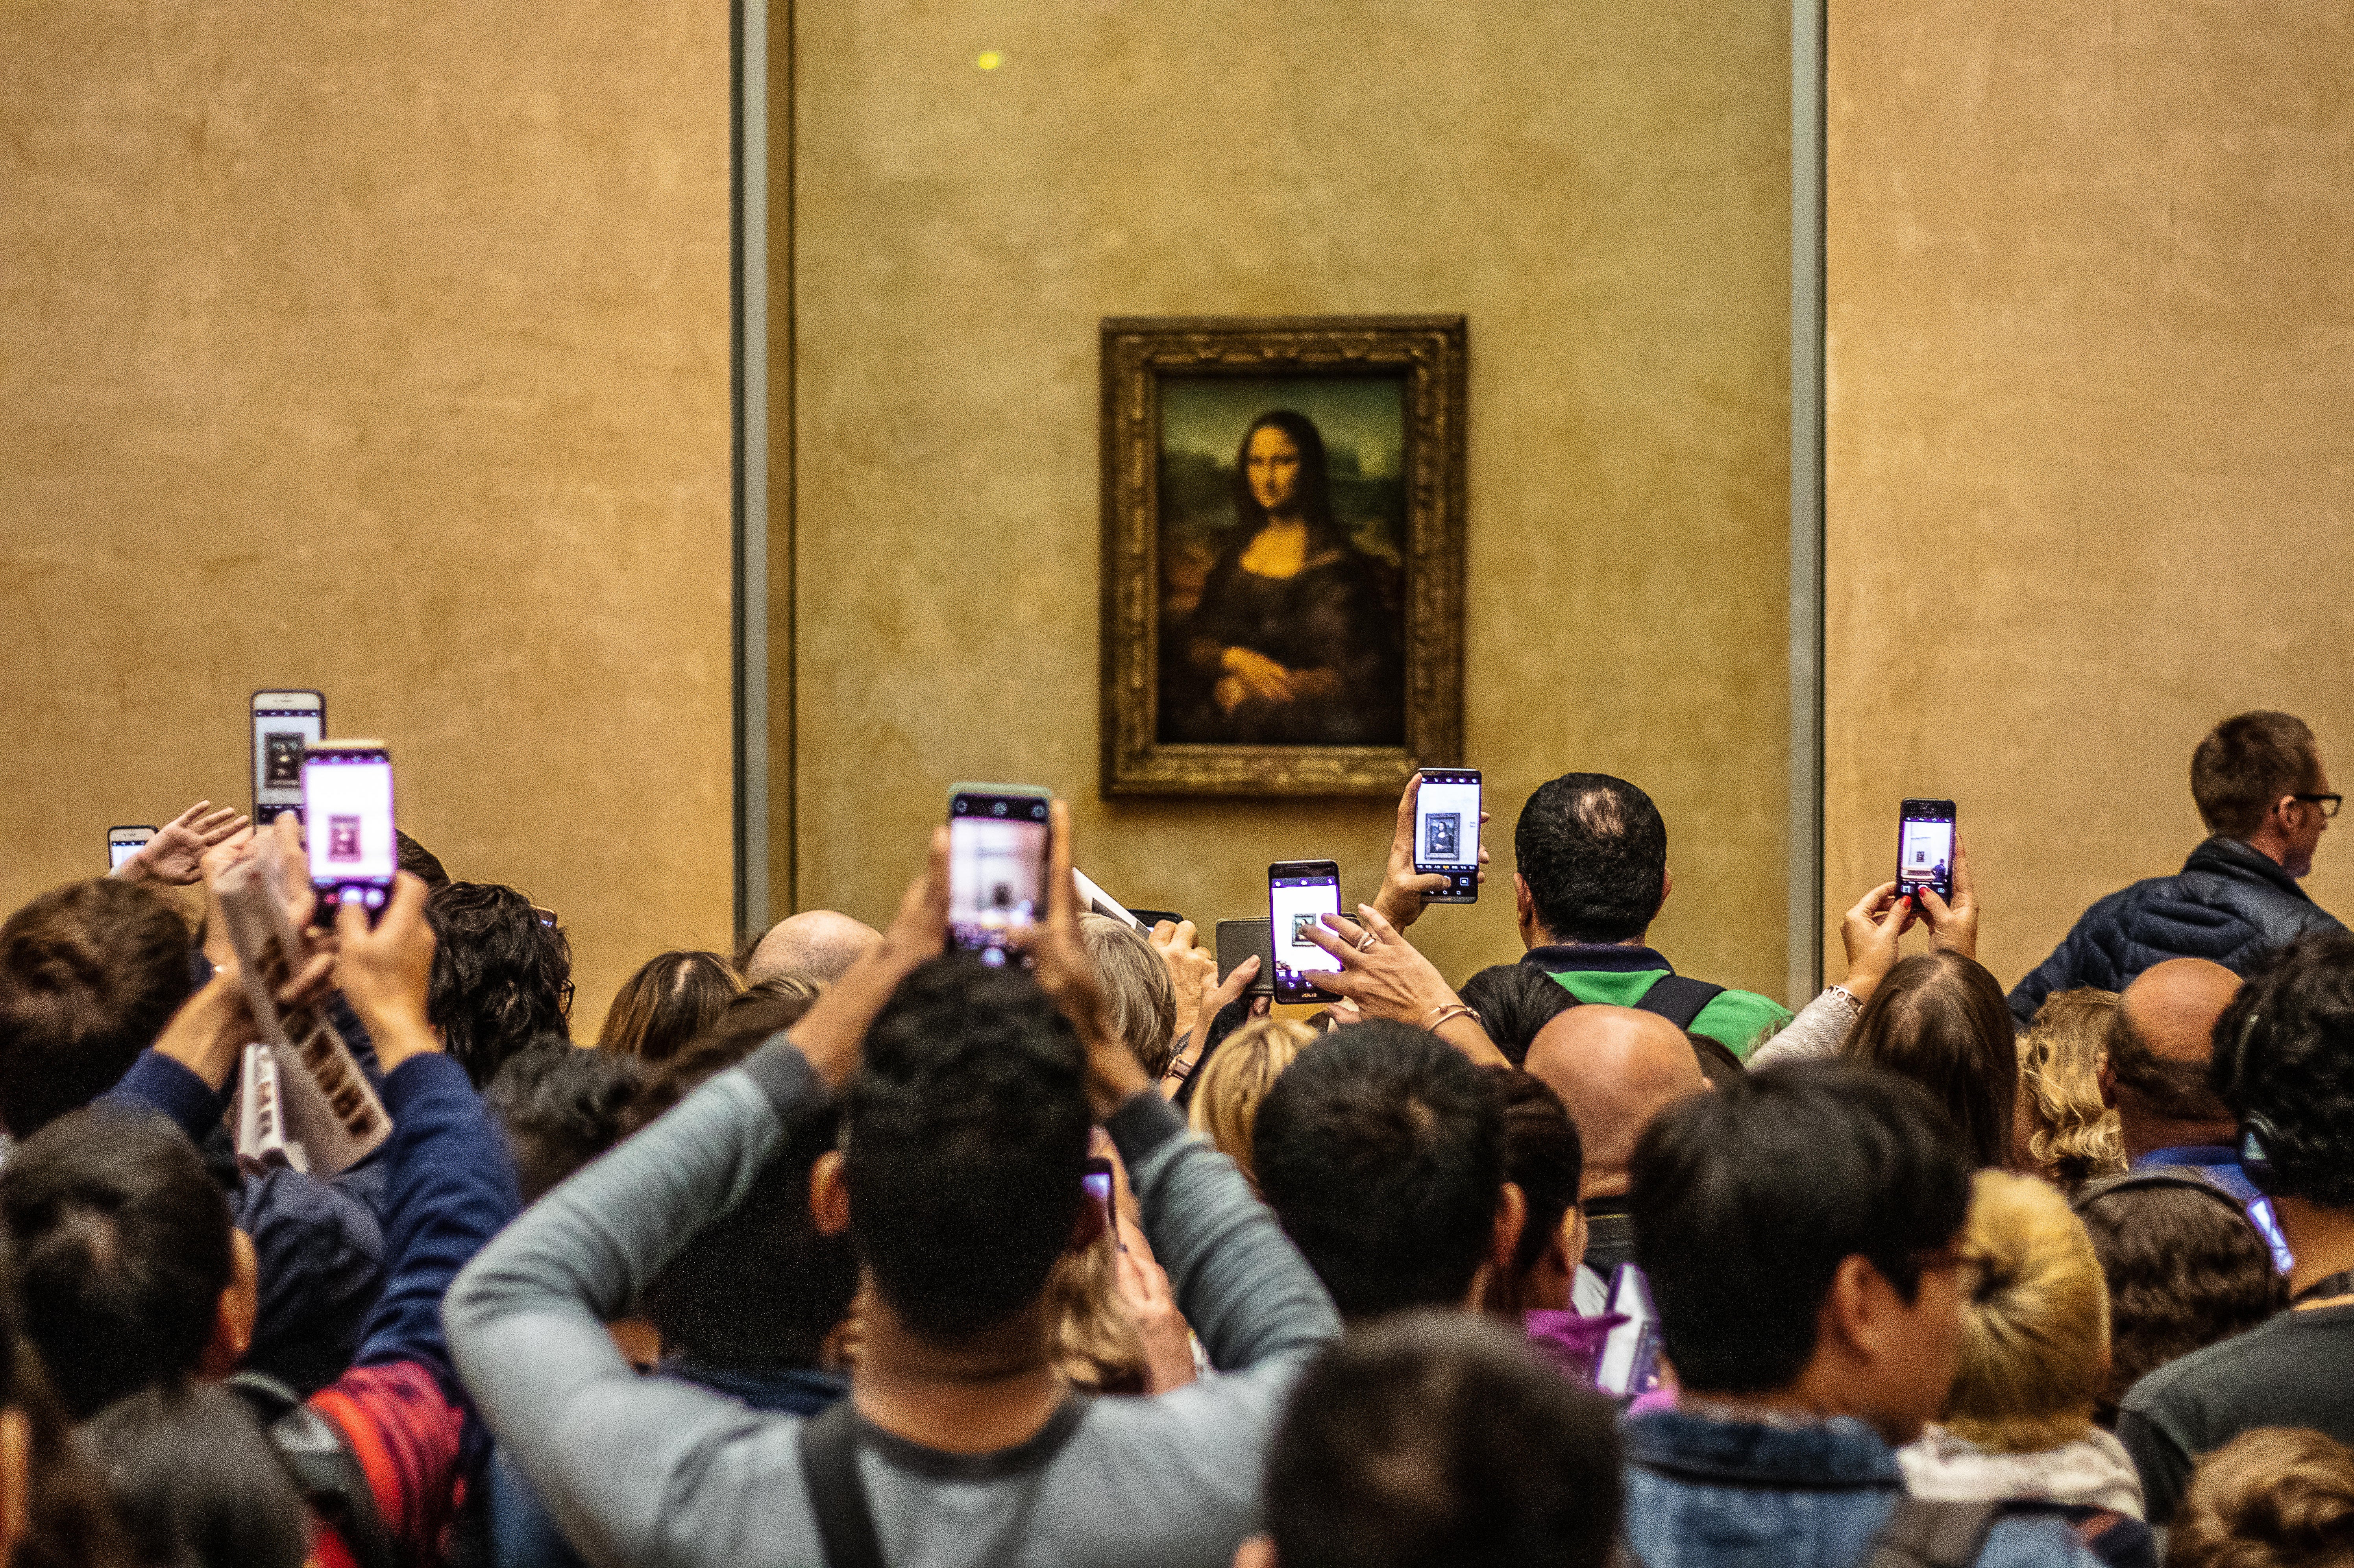 Phone-a Lisa: individuals refusing to experience the famous artwork unless it’s through their screens